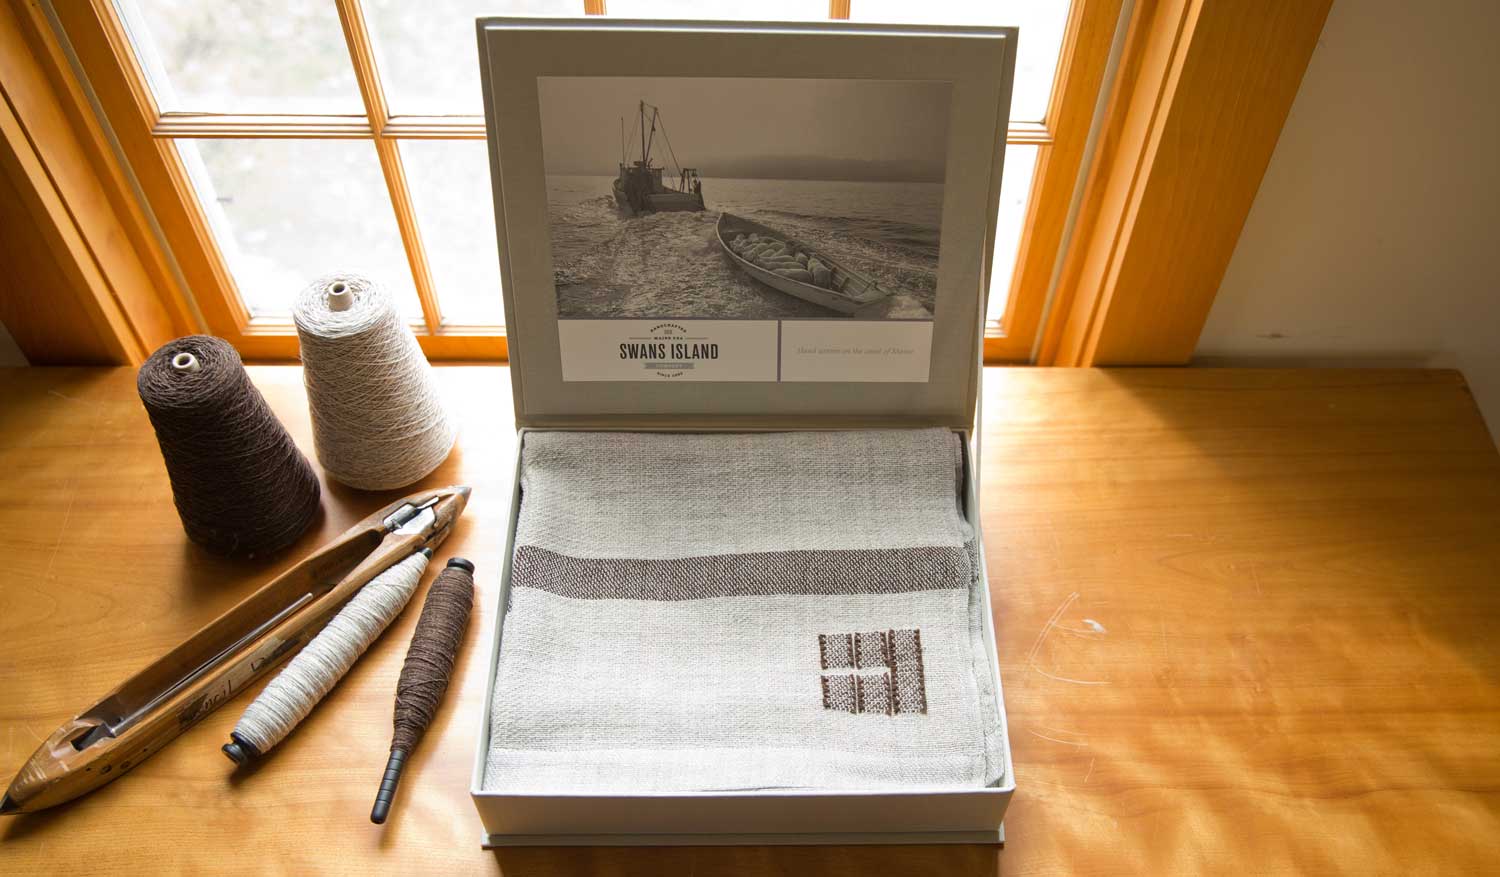 The Swans Island Limited Edition Island Throw comes in our distinctive linen presentation gift box.